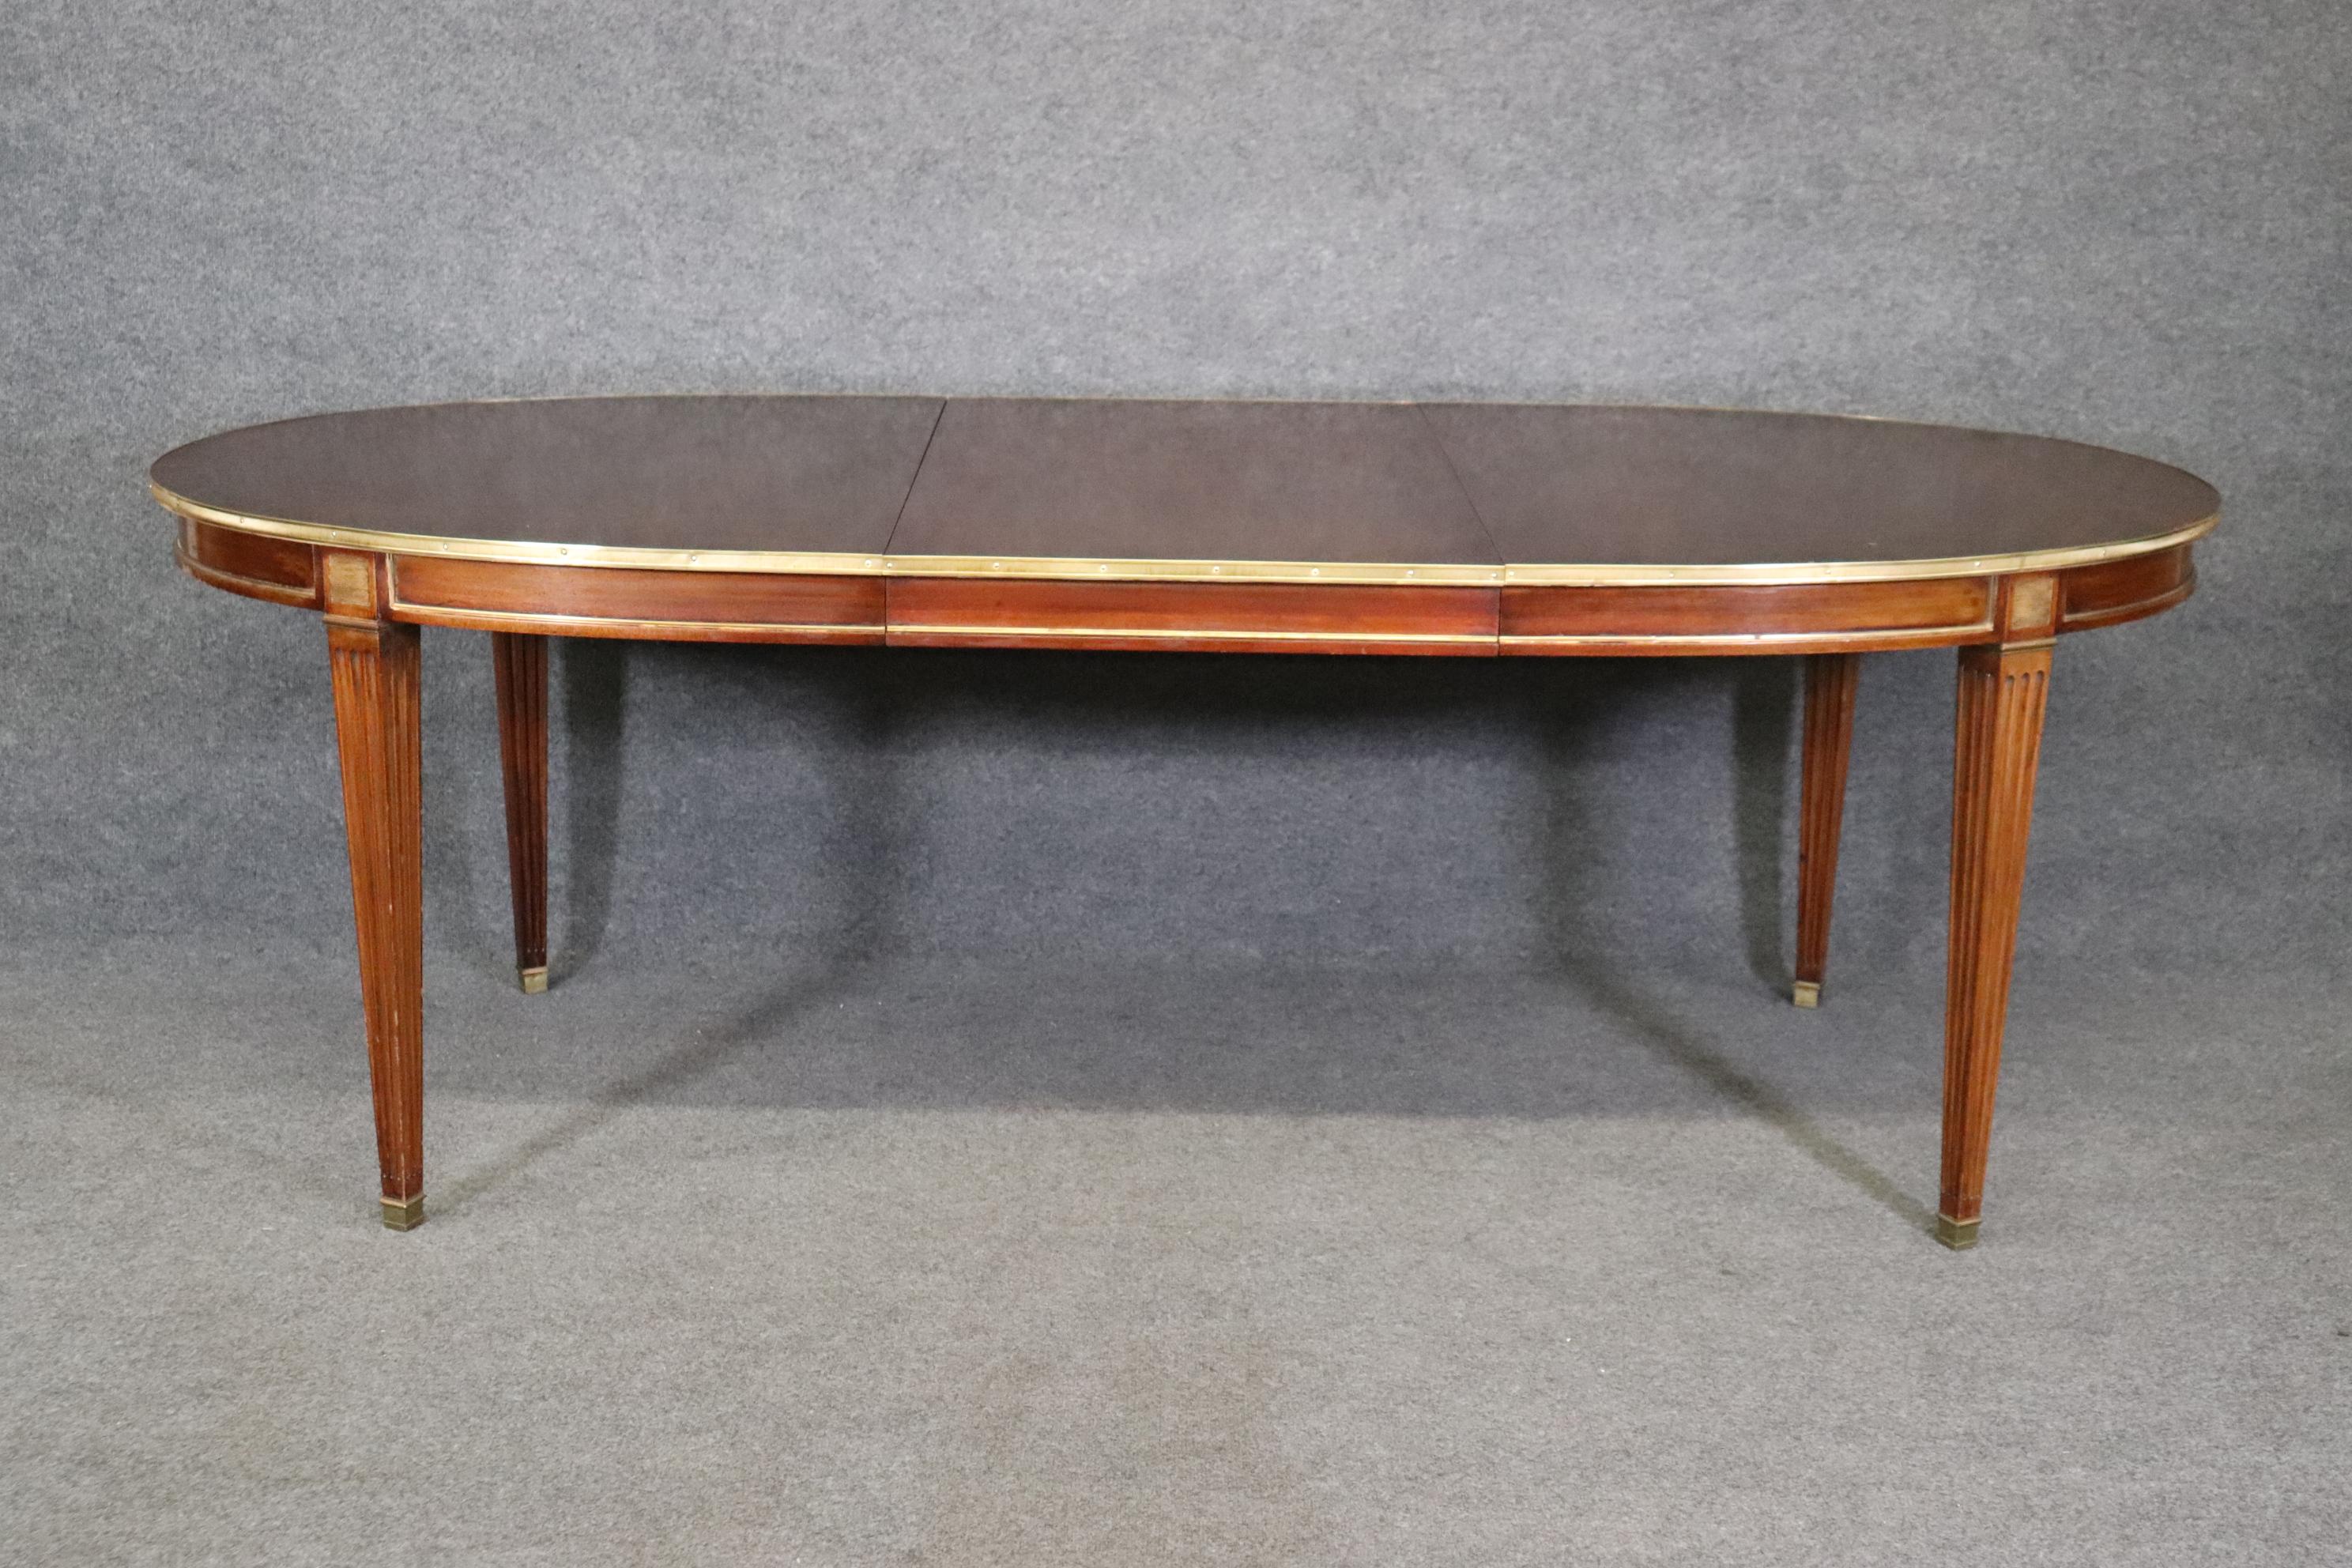 Dimensions- H: 30 1/4in W Closed: 66 1/4in D: 42 1/4in (W Leaf: 23 3/4in)

This Maison Jansen French Louis XVI Directoire style dining room table is truly a show stopper and gives off a sophisticated and minimalistic luxury vibe wherever it's